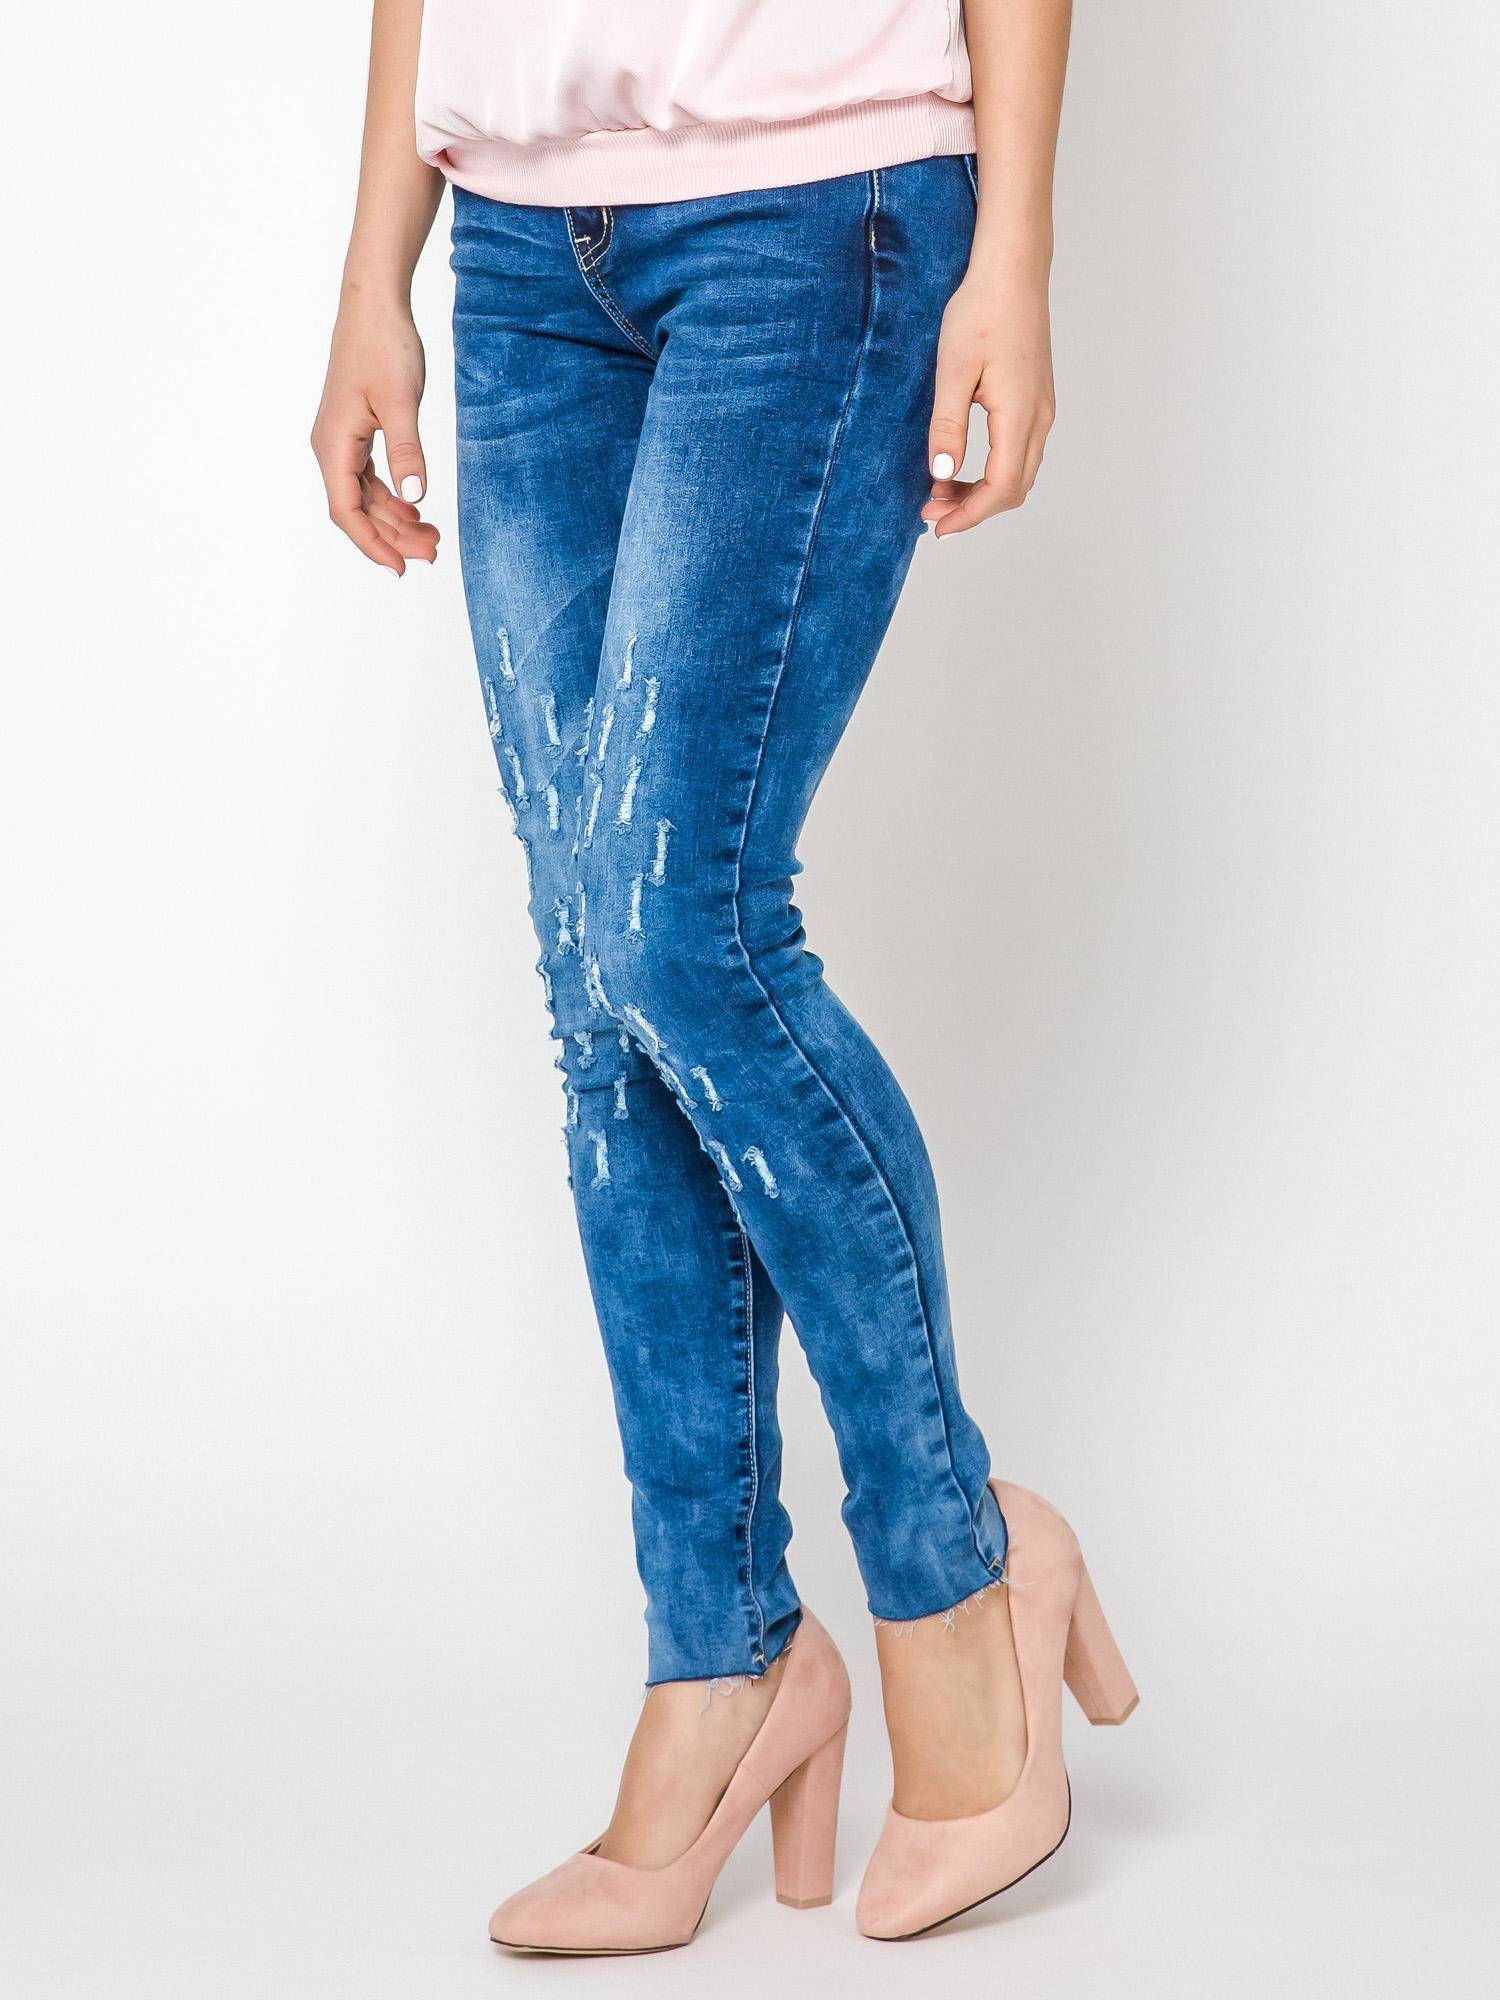 Jeans decorated with draping at the knees navy blue